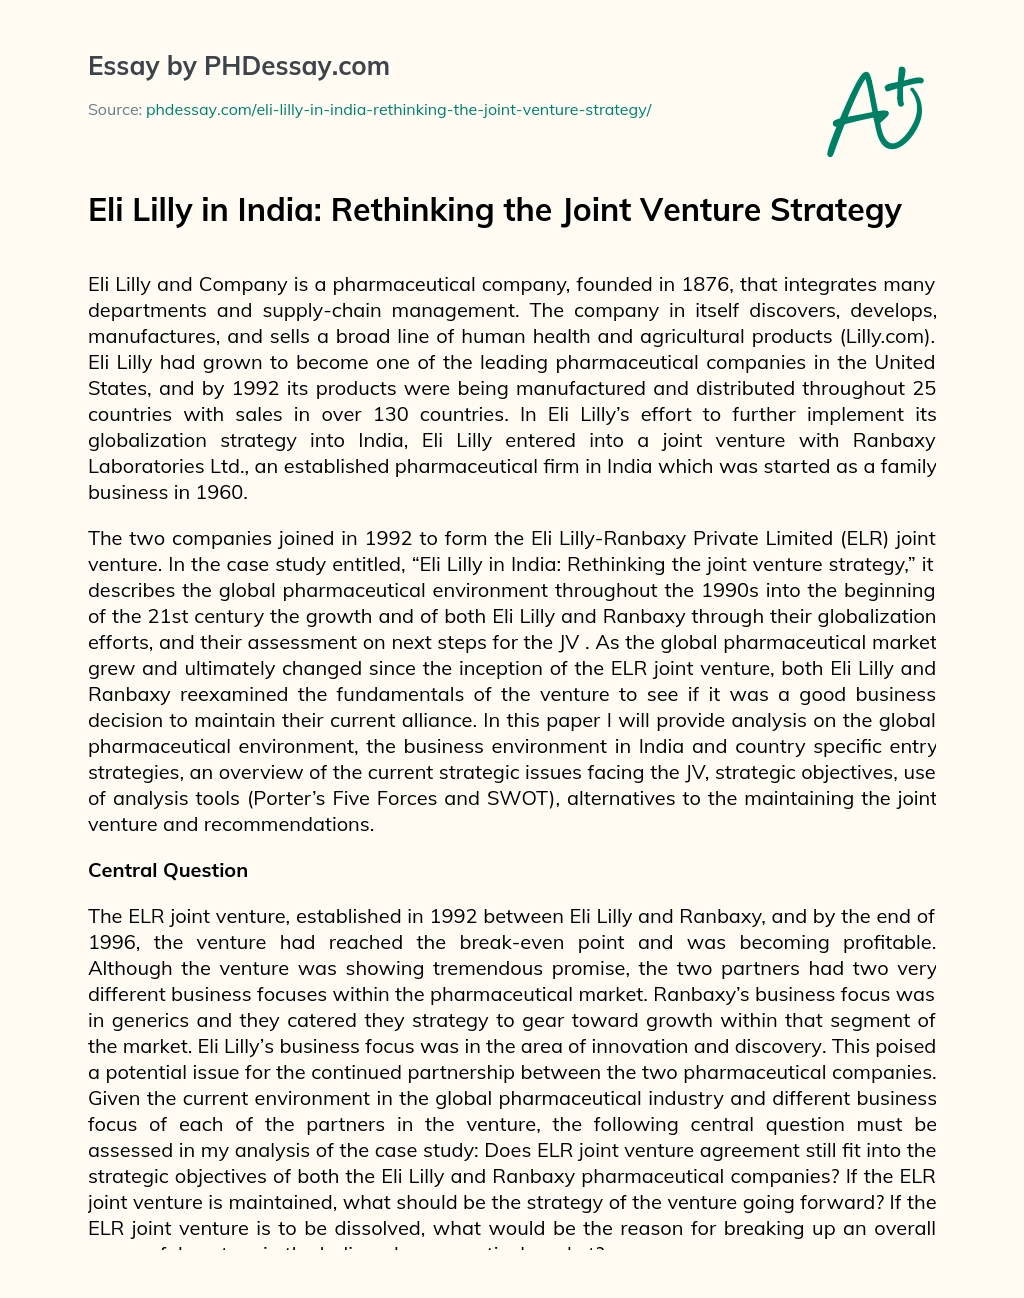 Eli Lilly in India: Rethinking the Joint Venture Strategy essay